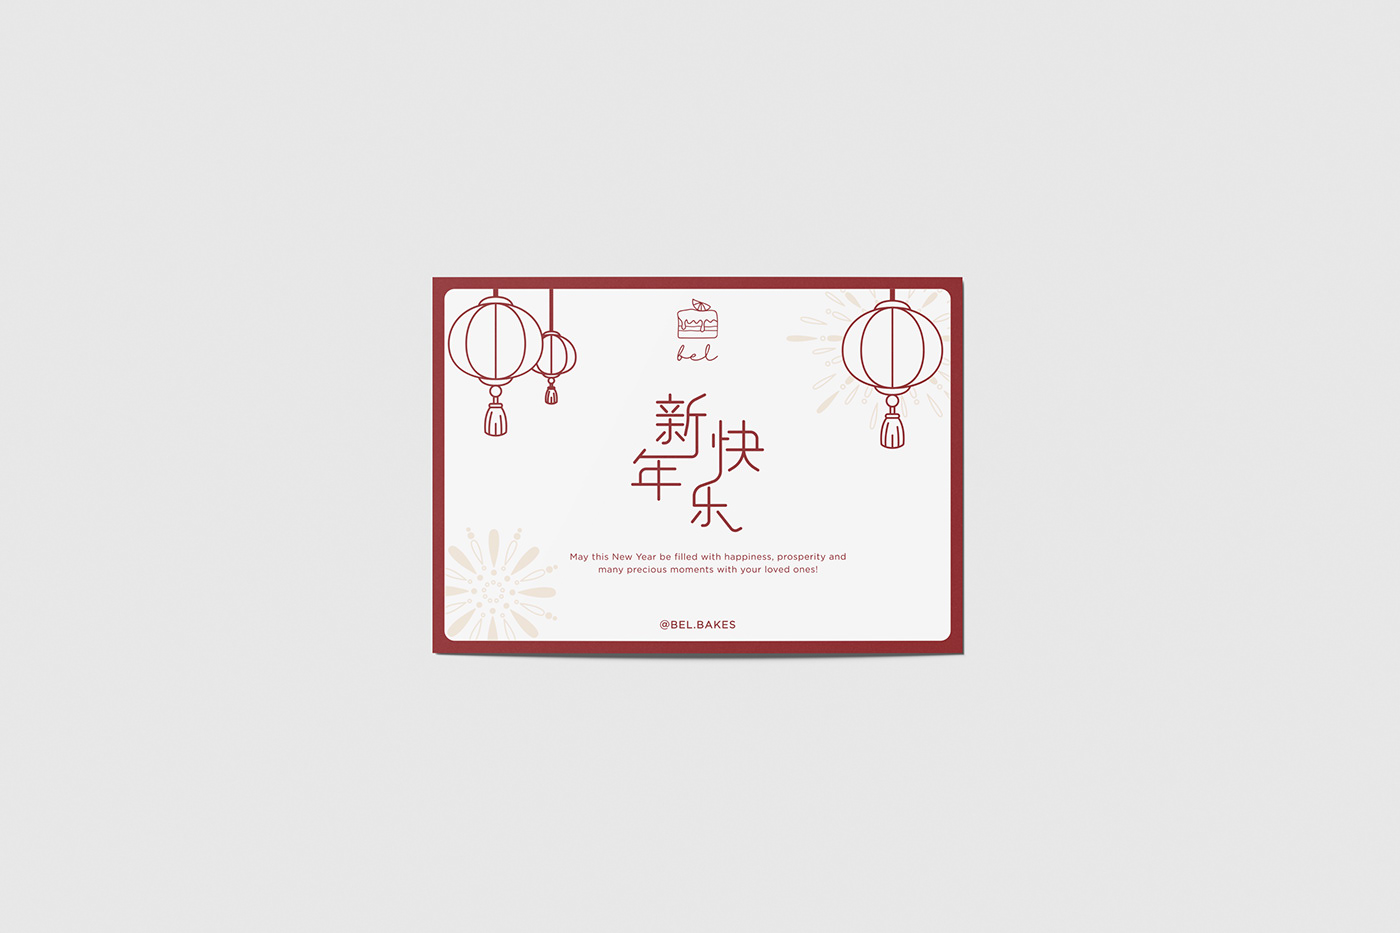 bakery cake cny design greeting card Label Lunar New Year Red Pocket Stationery